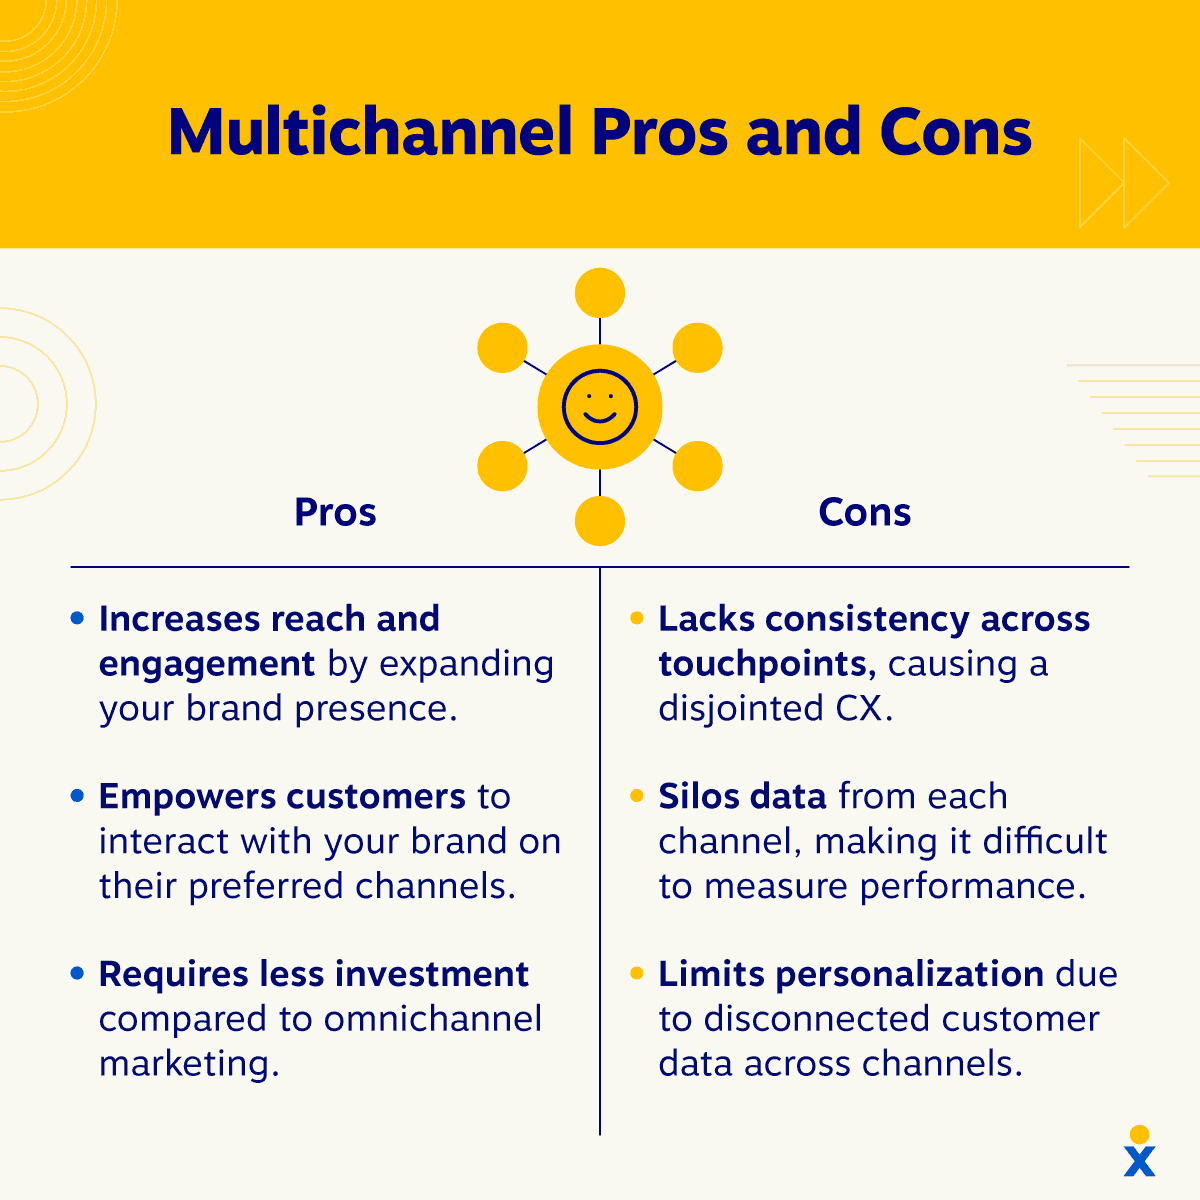 A chart shows multichannel pros and cons